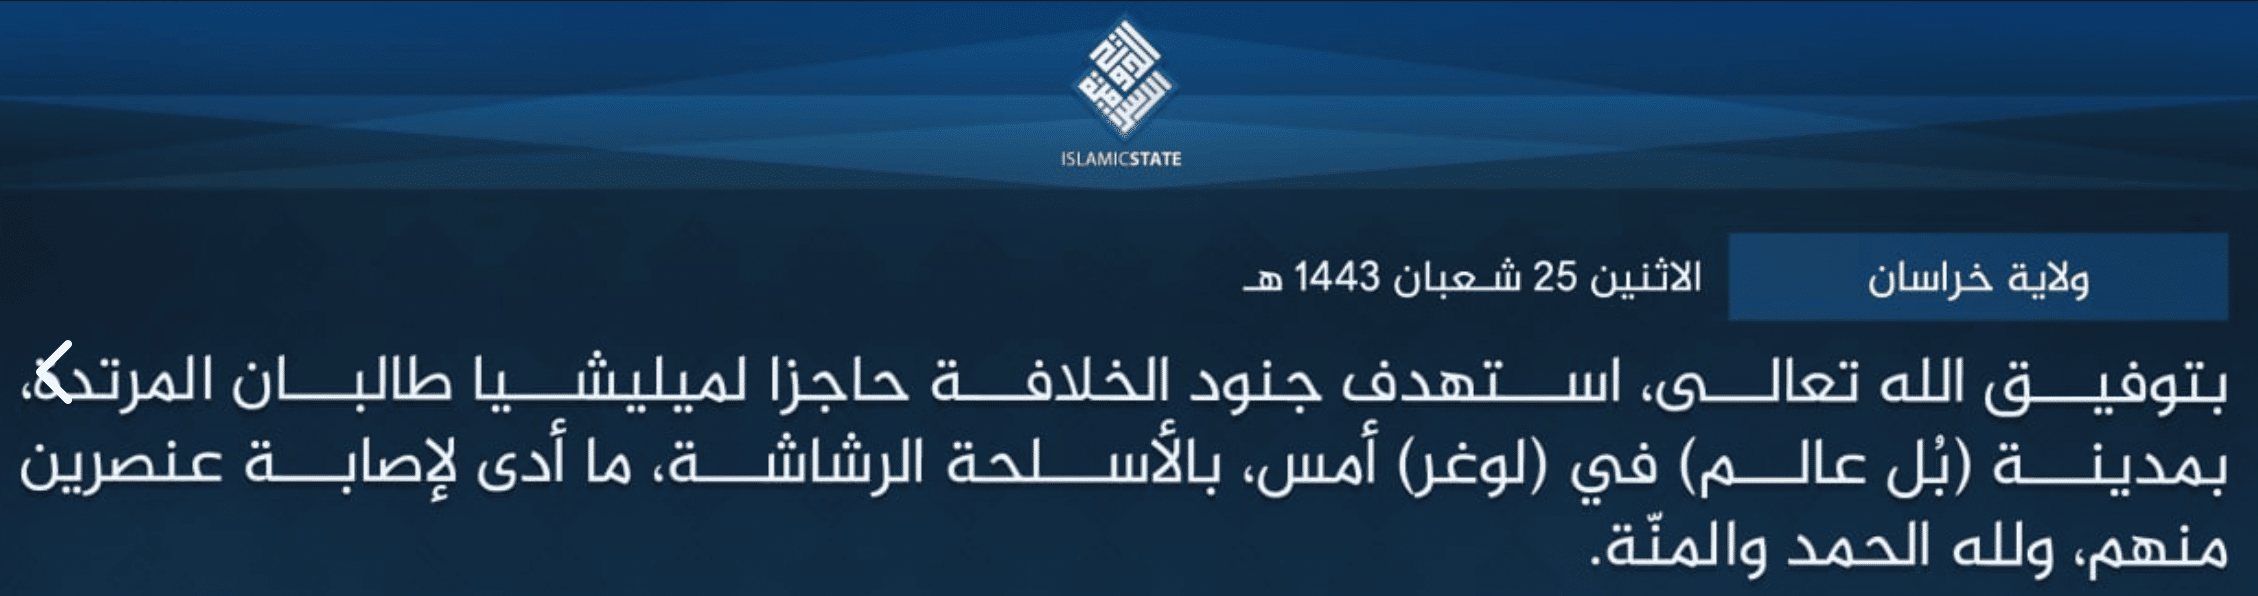 Islamic State Khurasan (ISK): Yesterday, Soldiers of Caliphate Armed Assault on Taliban (IEA) Checkpoint in Logar, Afghanistan - 28 March 2022